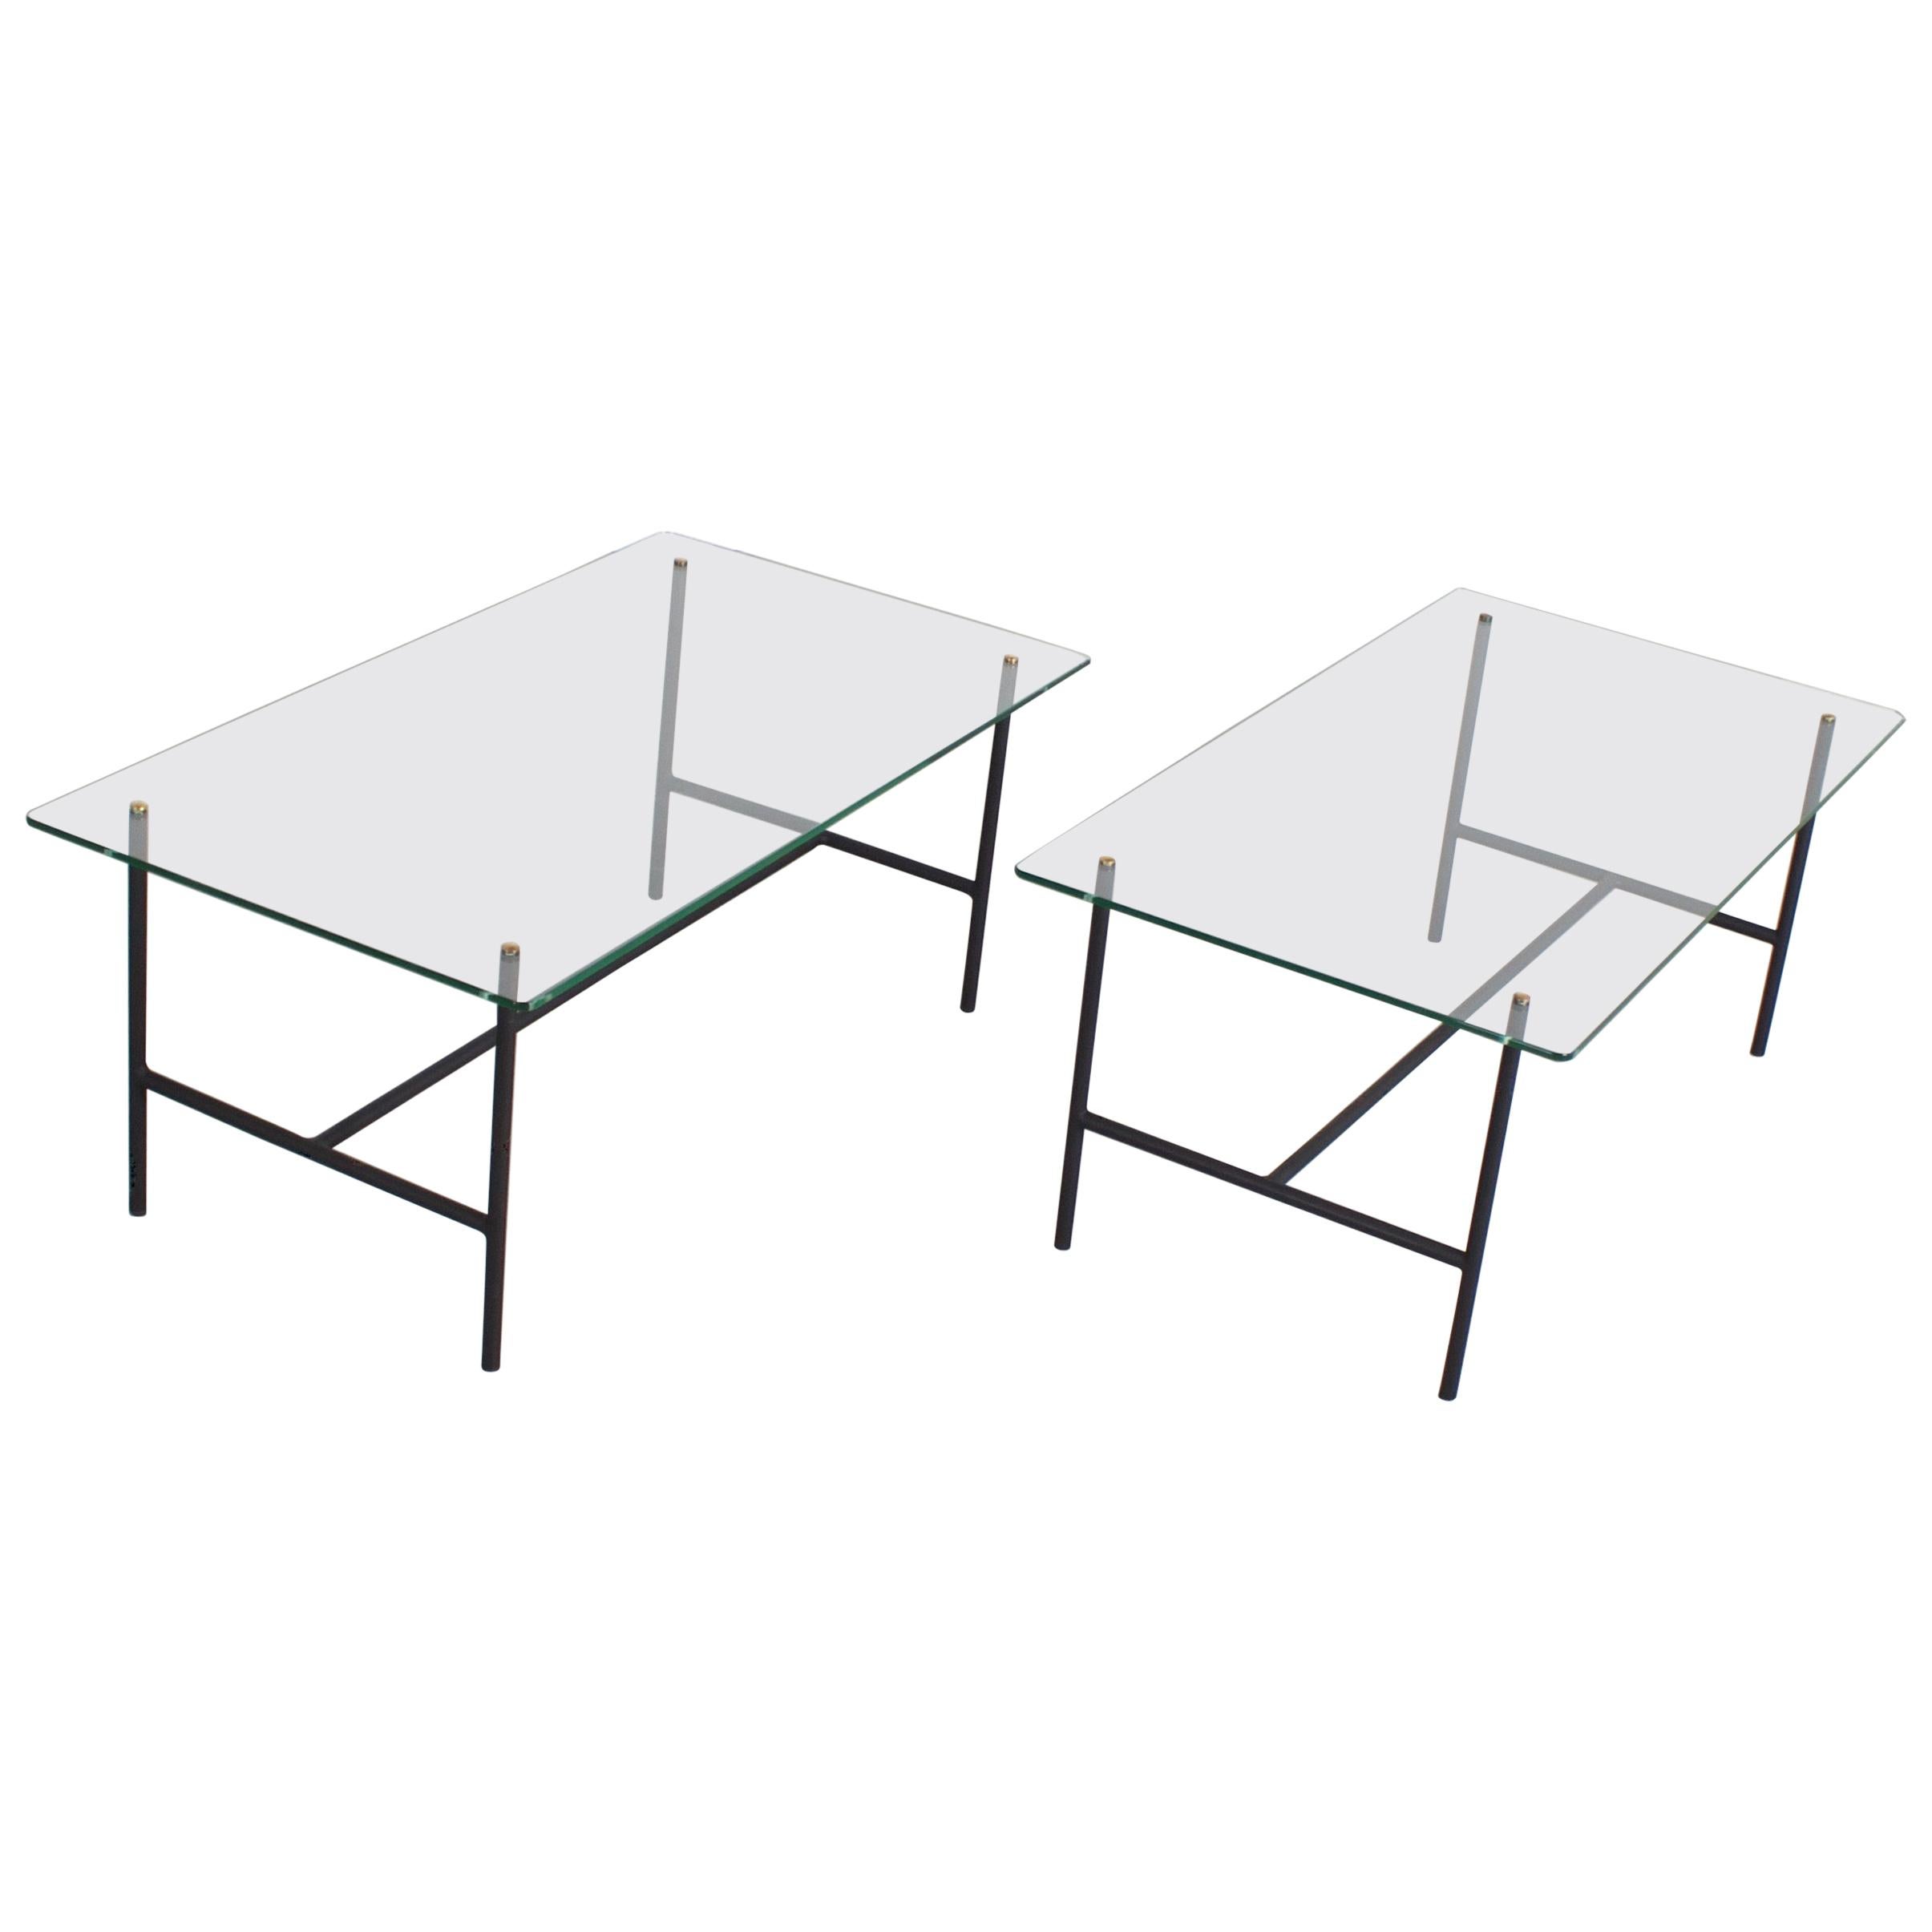 Pair of Midcentury Metal and Glass Tables by Pierre Guariche, France, 1950s